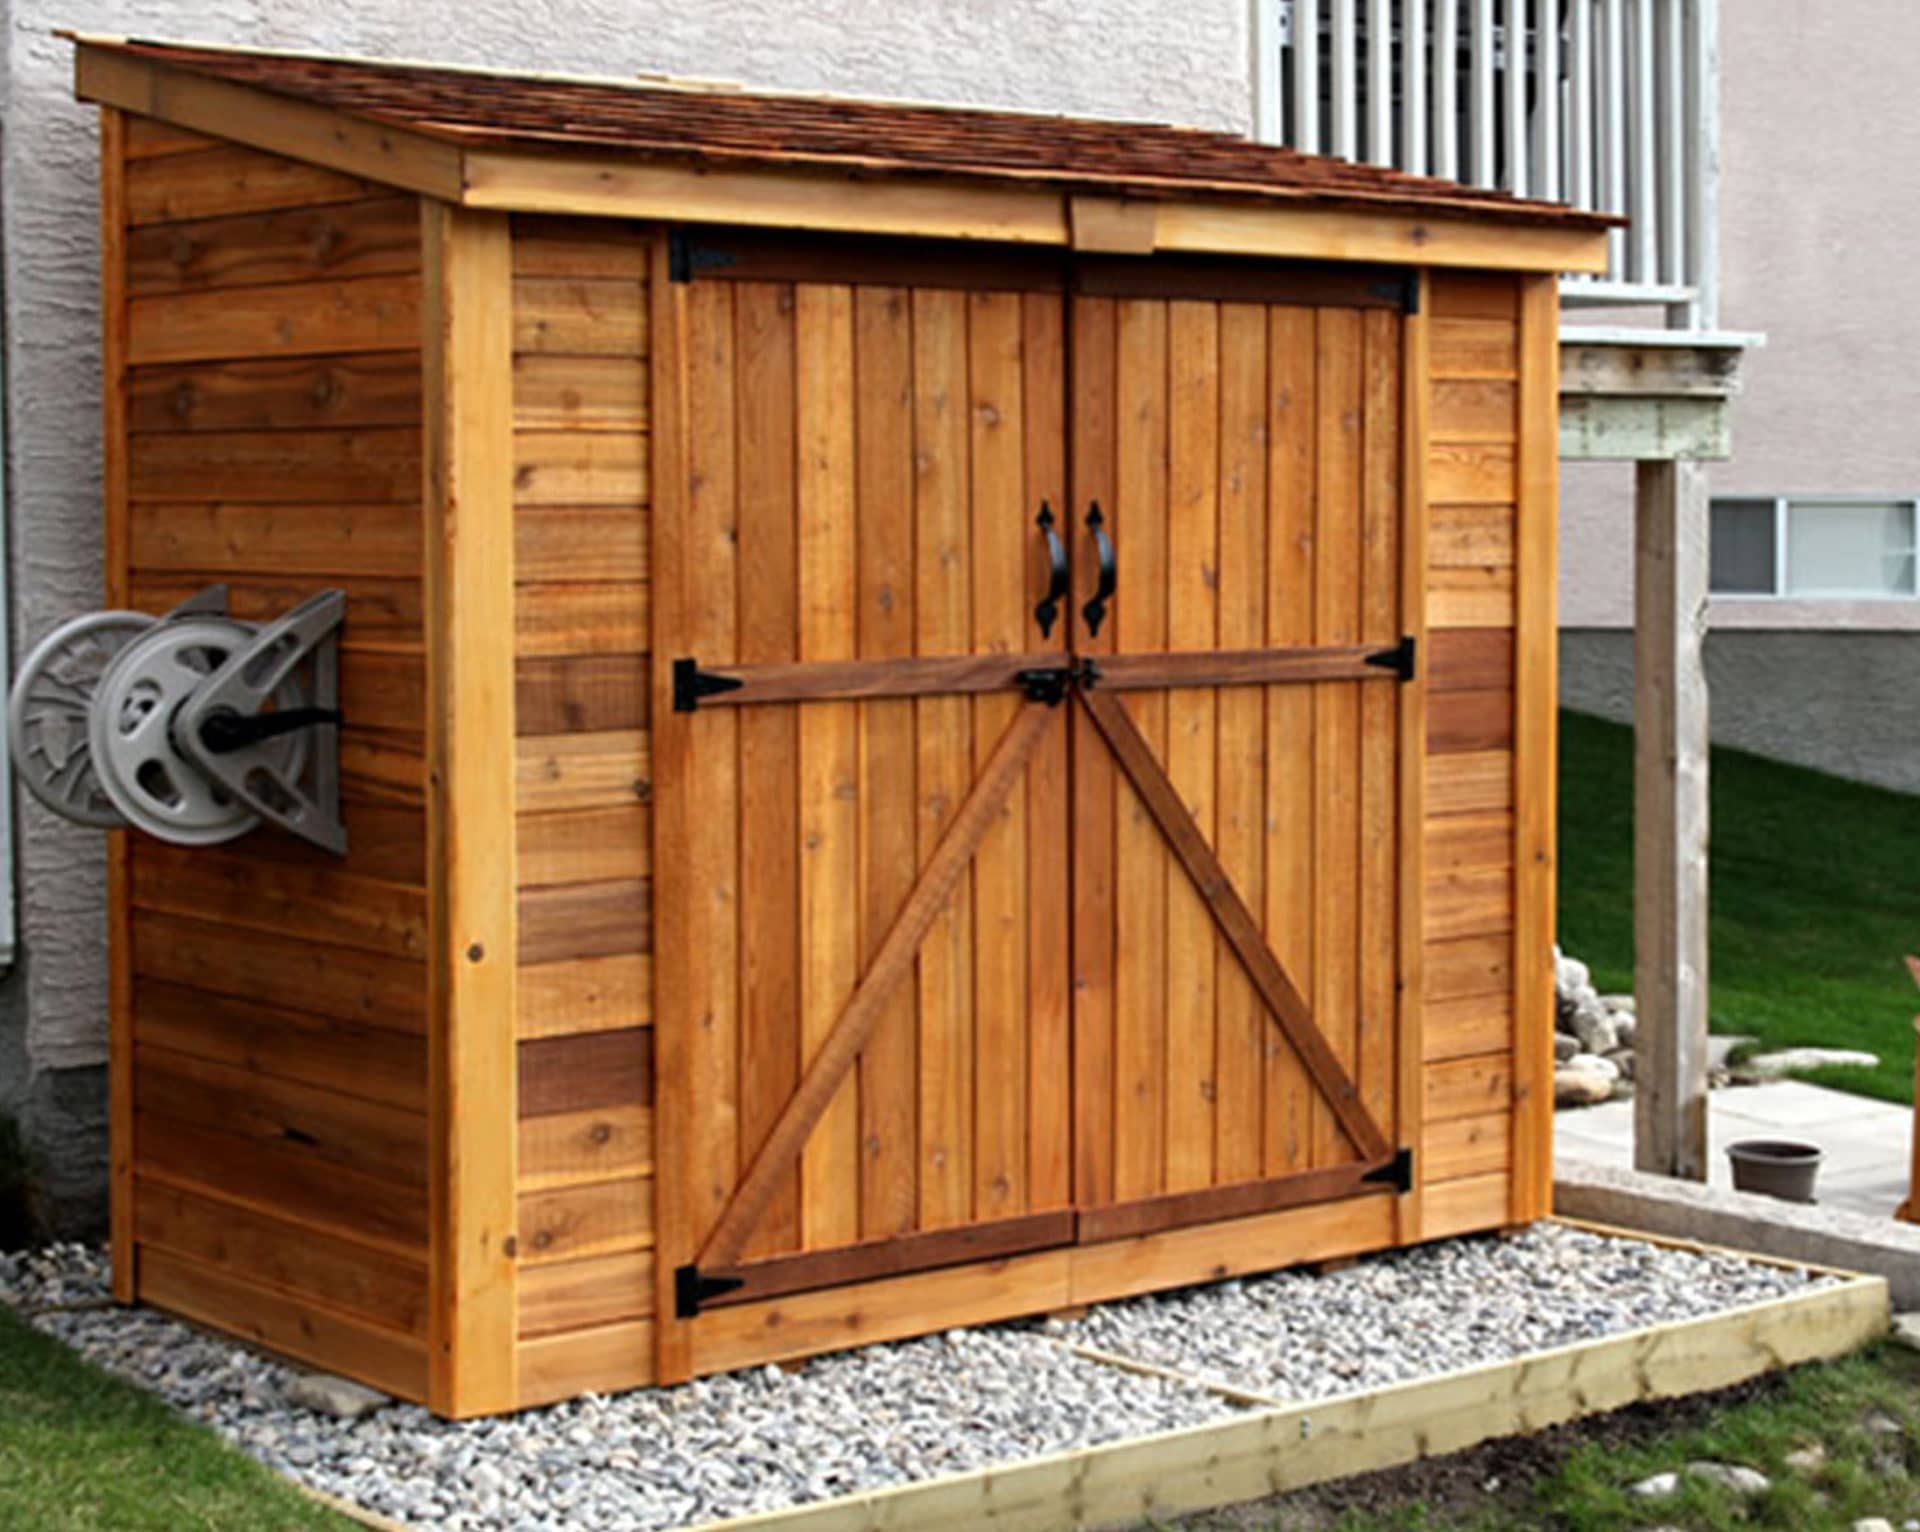 Lean to Shed SpaceSaver 8x4 - Double Doors - Outdoor Living Today